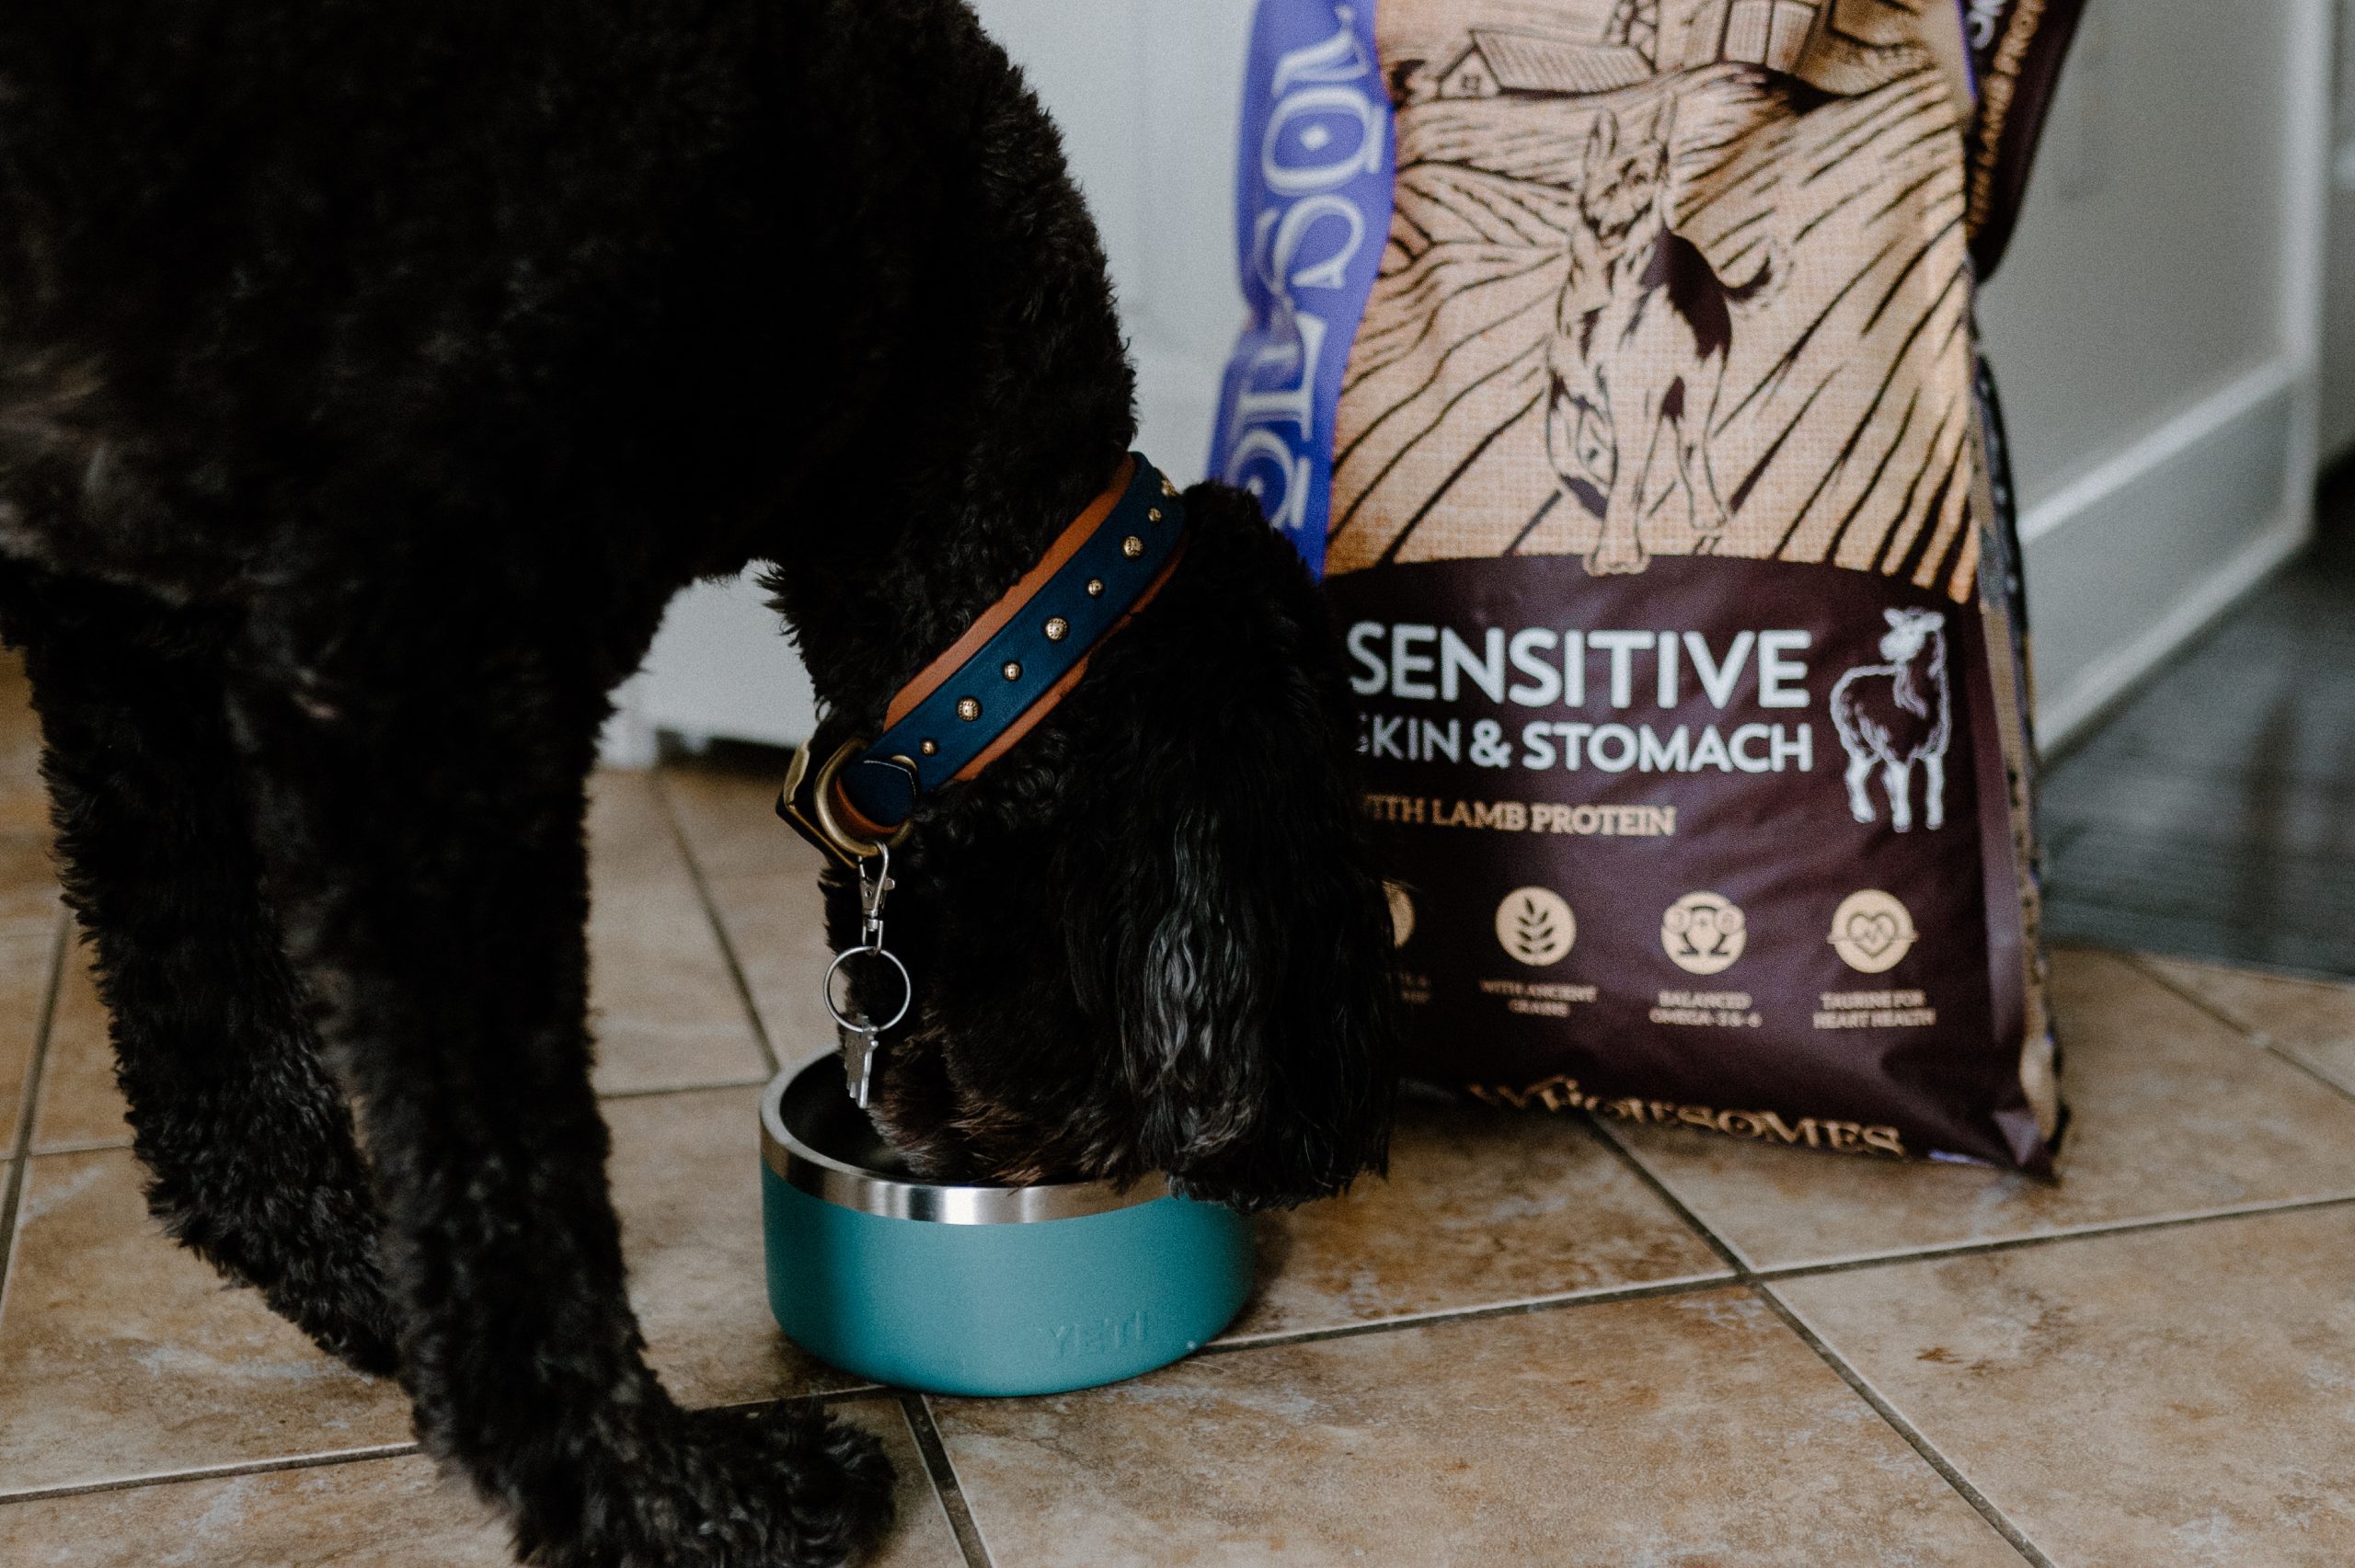 A dog eats out of a dog food bowl while a bag of Wholesomes Sensitive Skin & Stomach dog food sits in the background